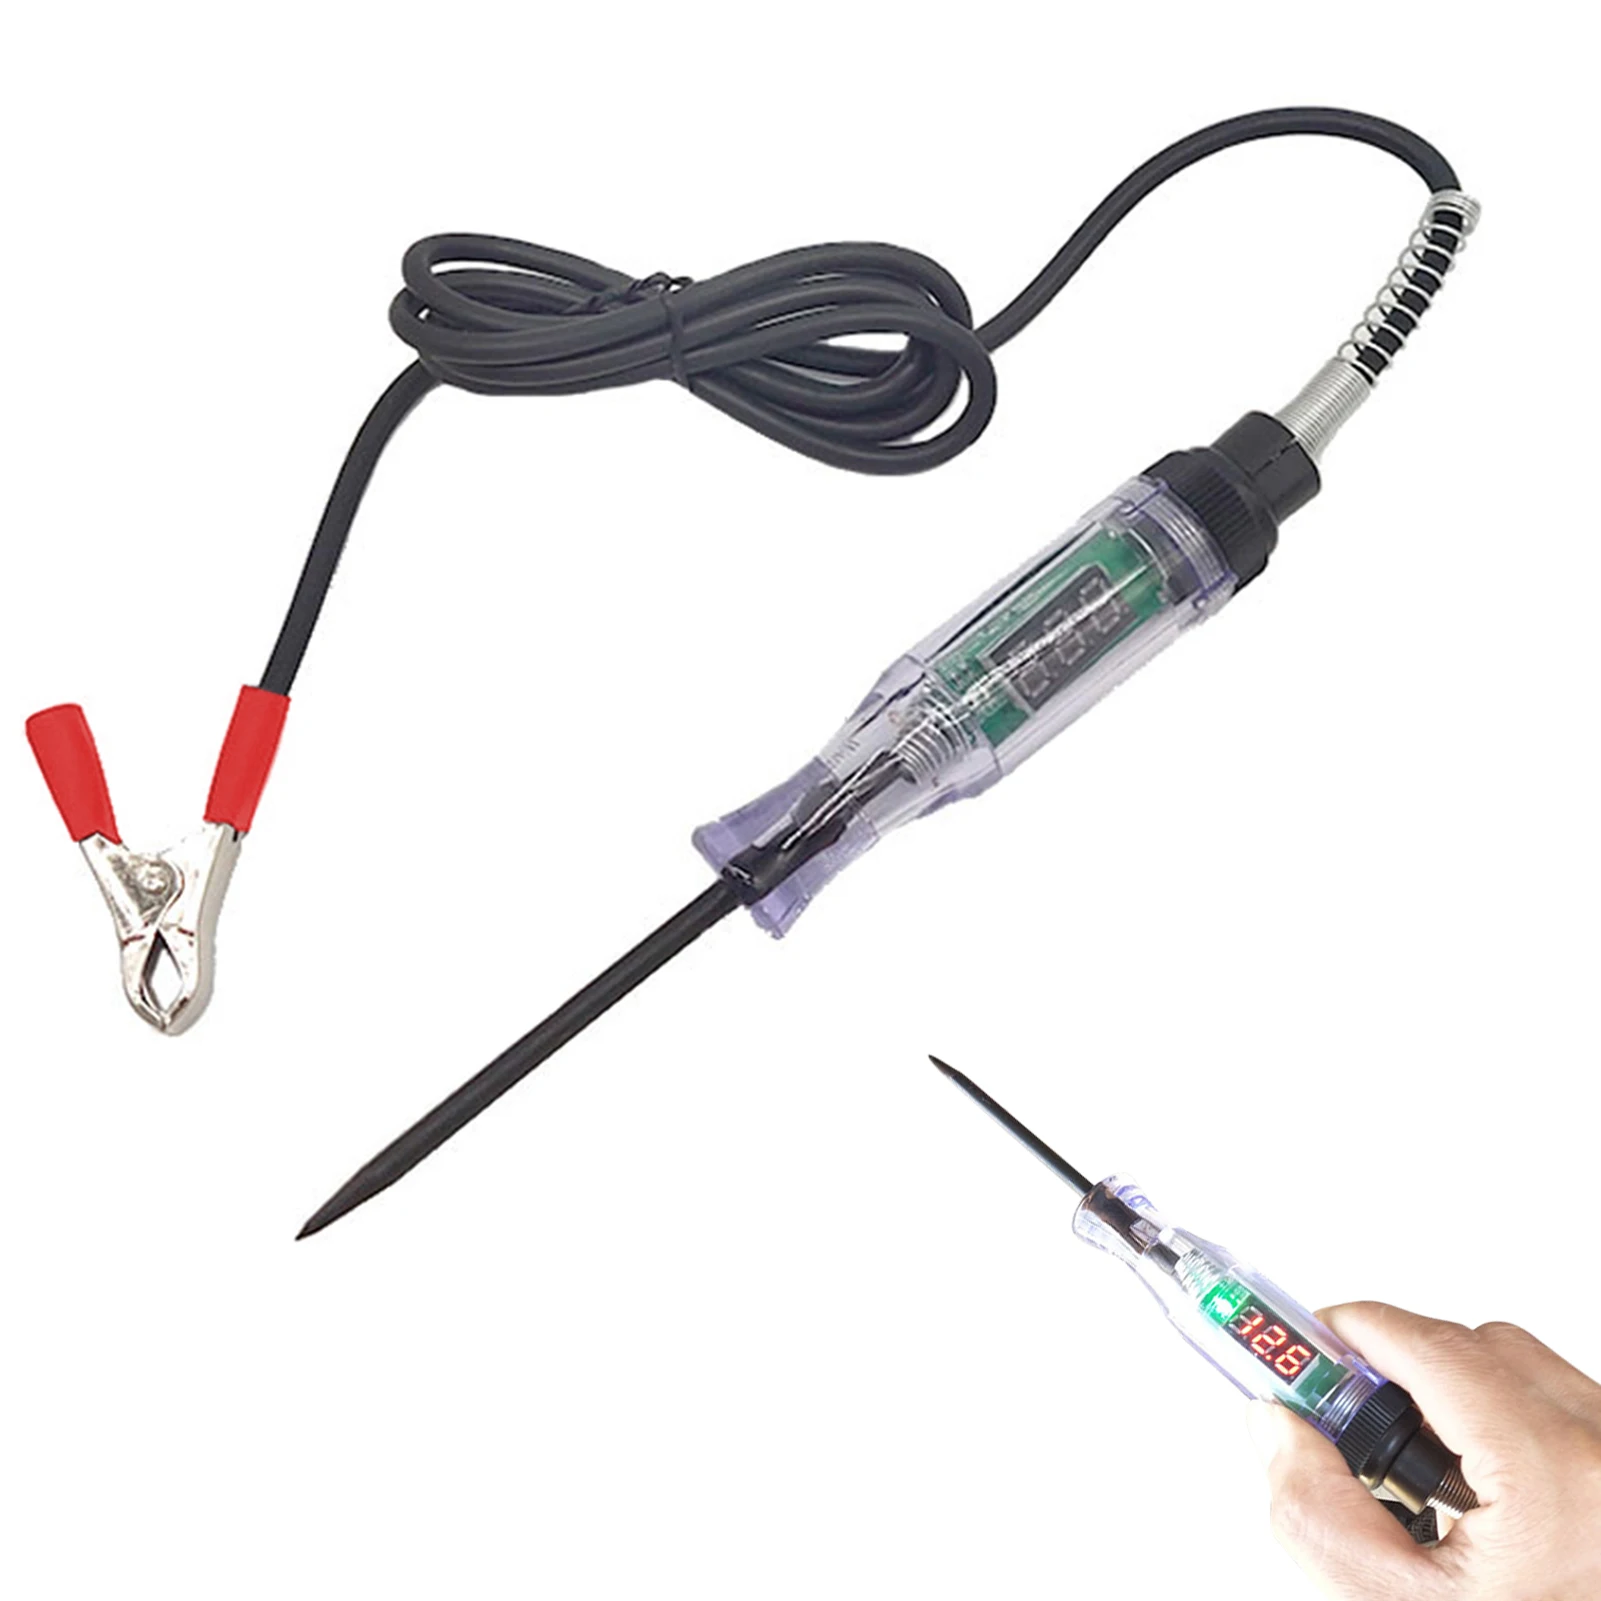 Backlit Digital LCD 3-48V Circuit Tester Car Truck Low Voltage & Automotive Test Light Tester Power Measuring Pen wdct a ct volt ampere characteristic tester voltammetry test equipment secondary circuit secondary ac voltage resistance